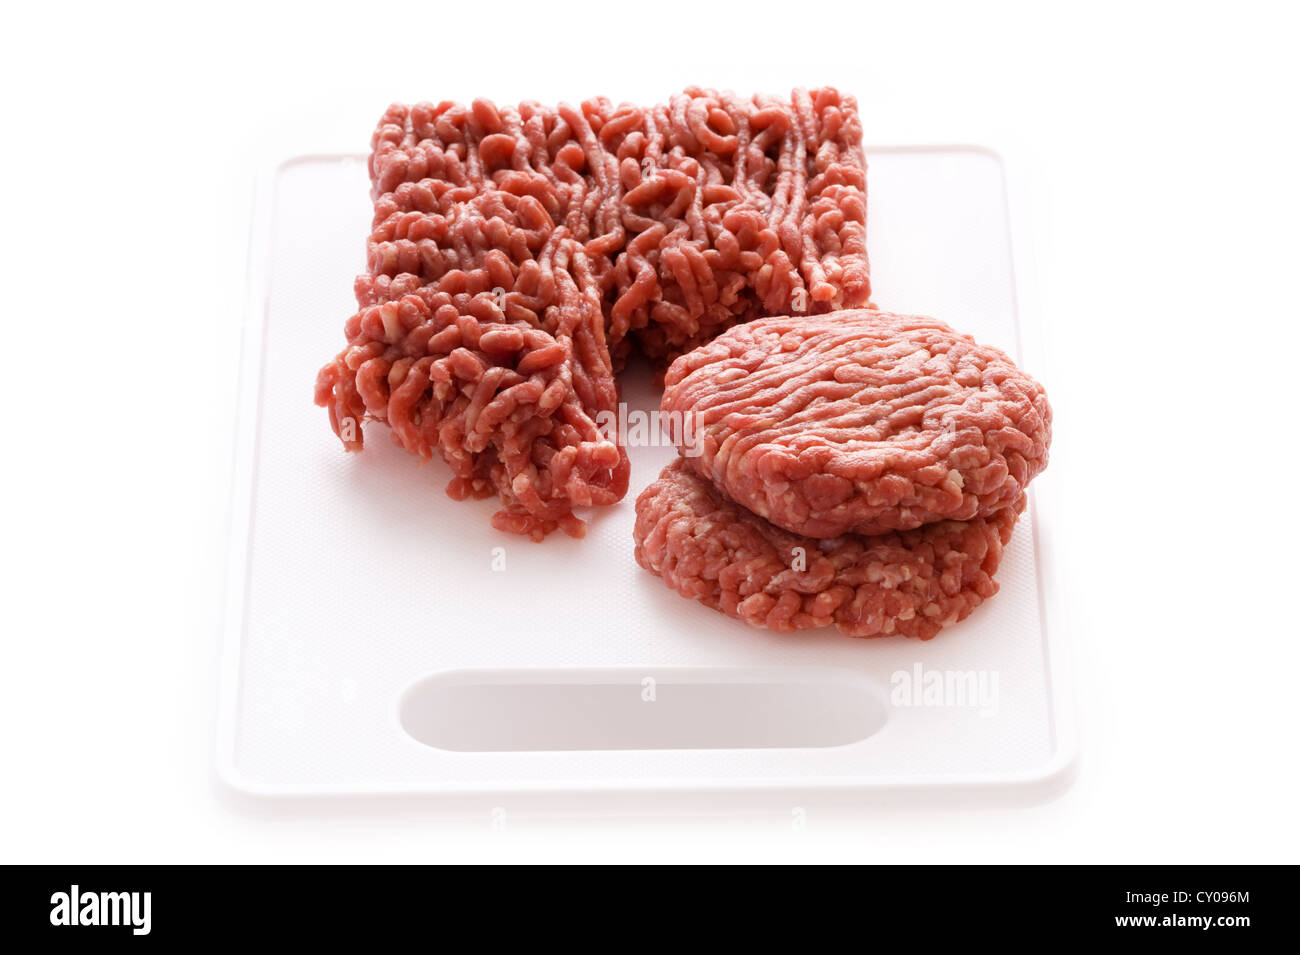 making hamburgers or beefburgers from minced beef or ground beef isolated on a white background Stock Photo